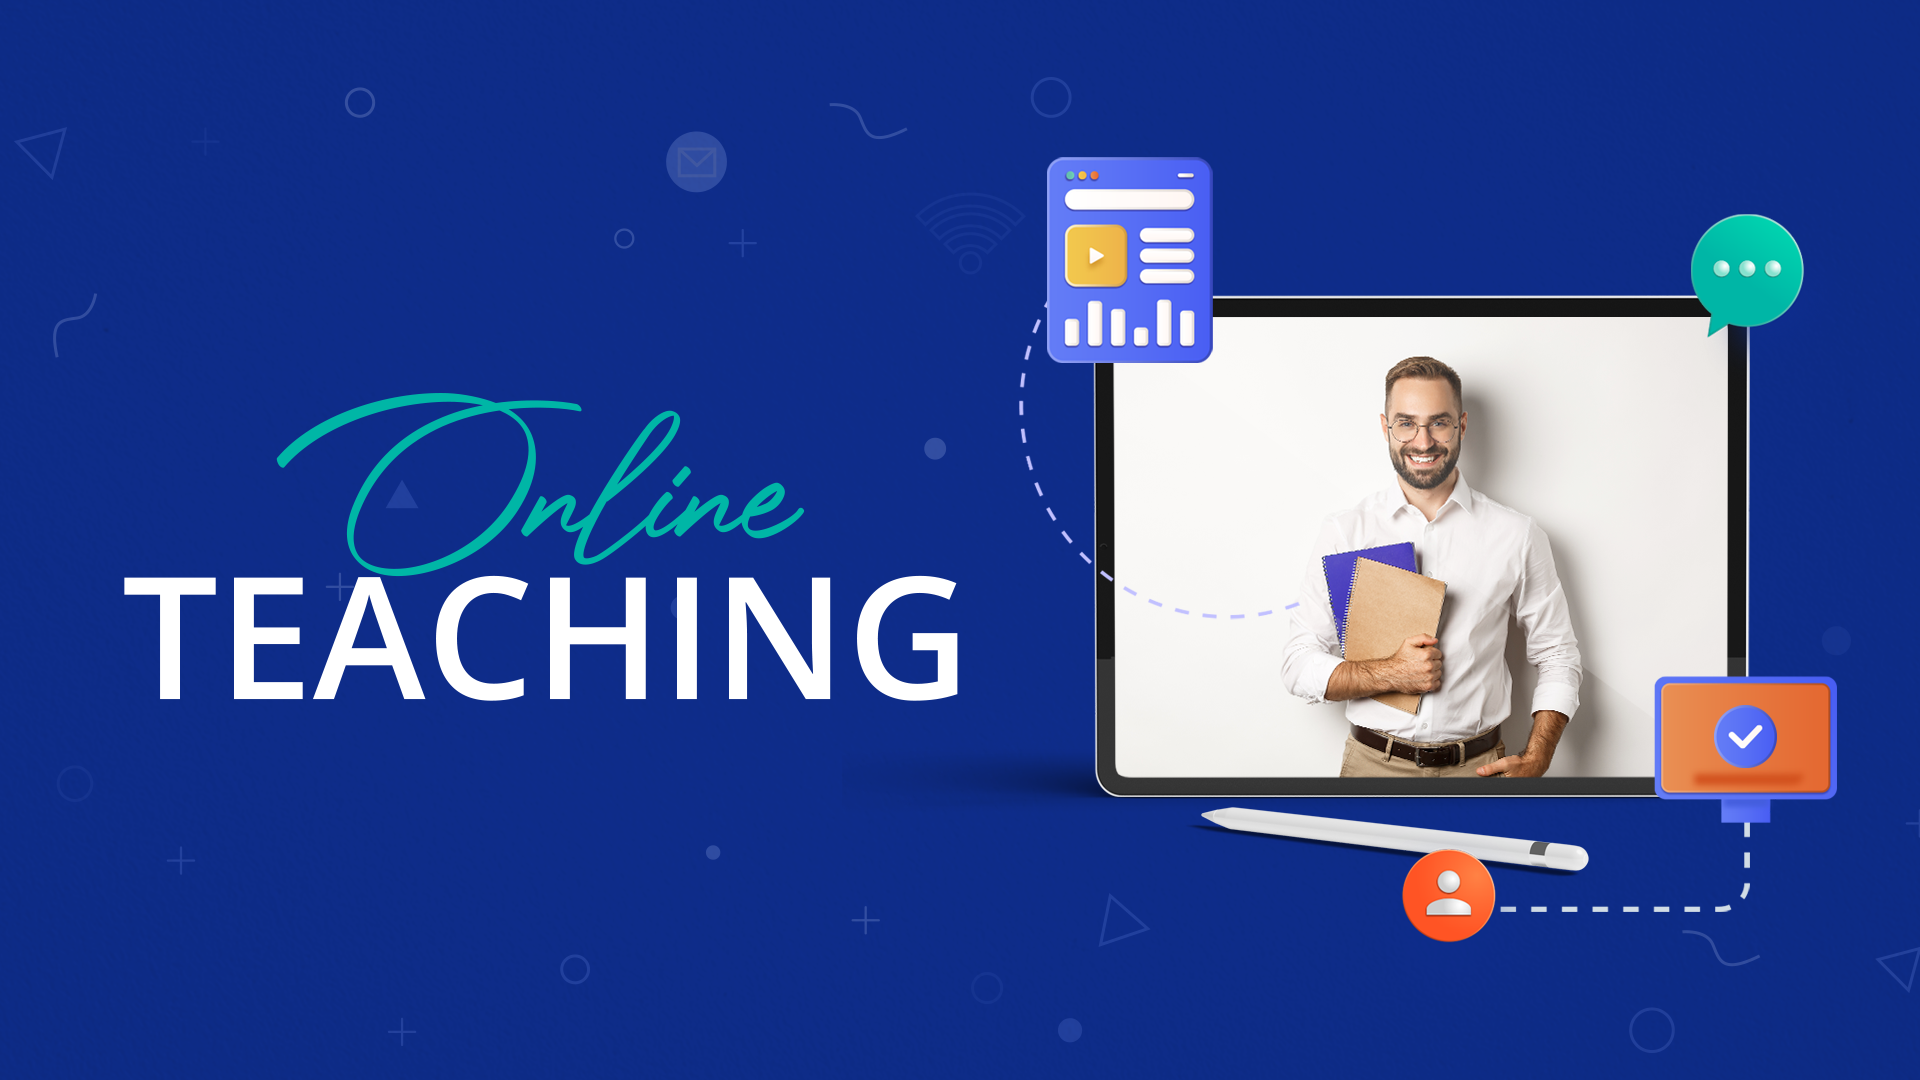 Online Teaching Credentials | A guide to unlocking great possibilities